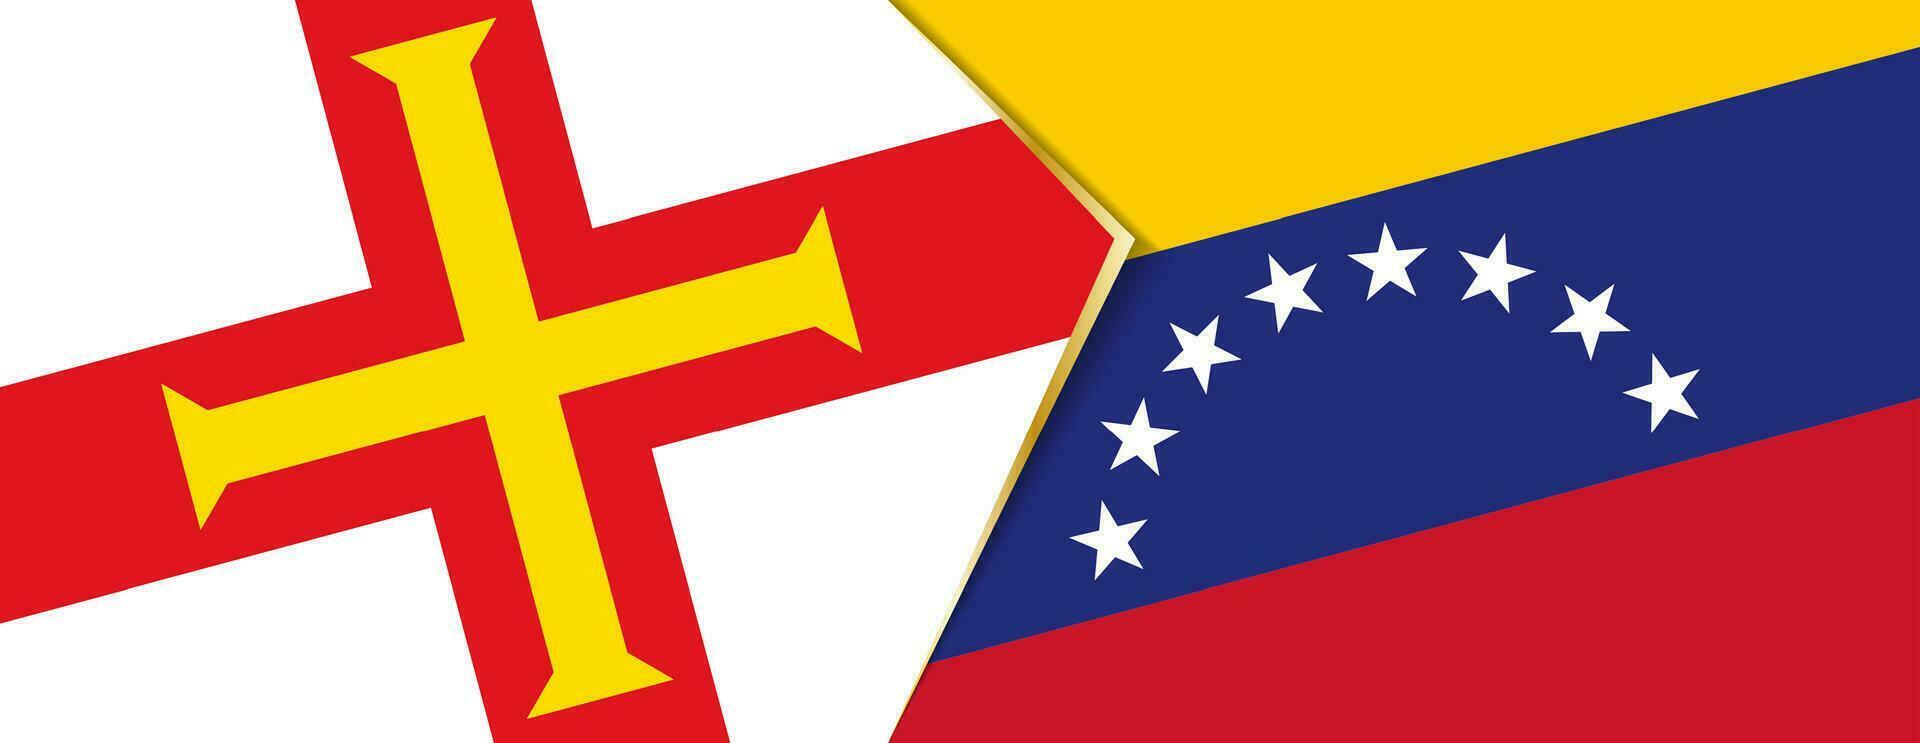 Guernsey and Venezuela flags, two vector flags.